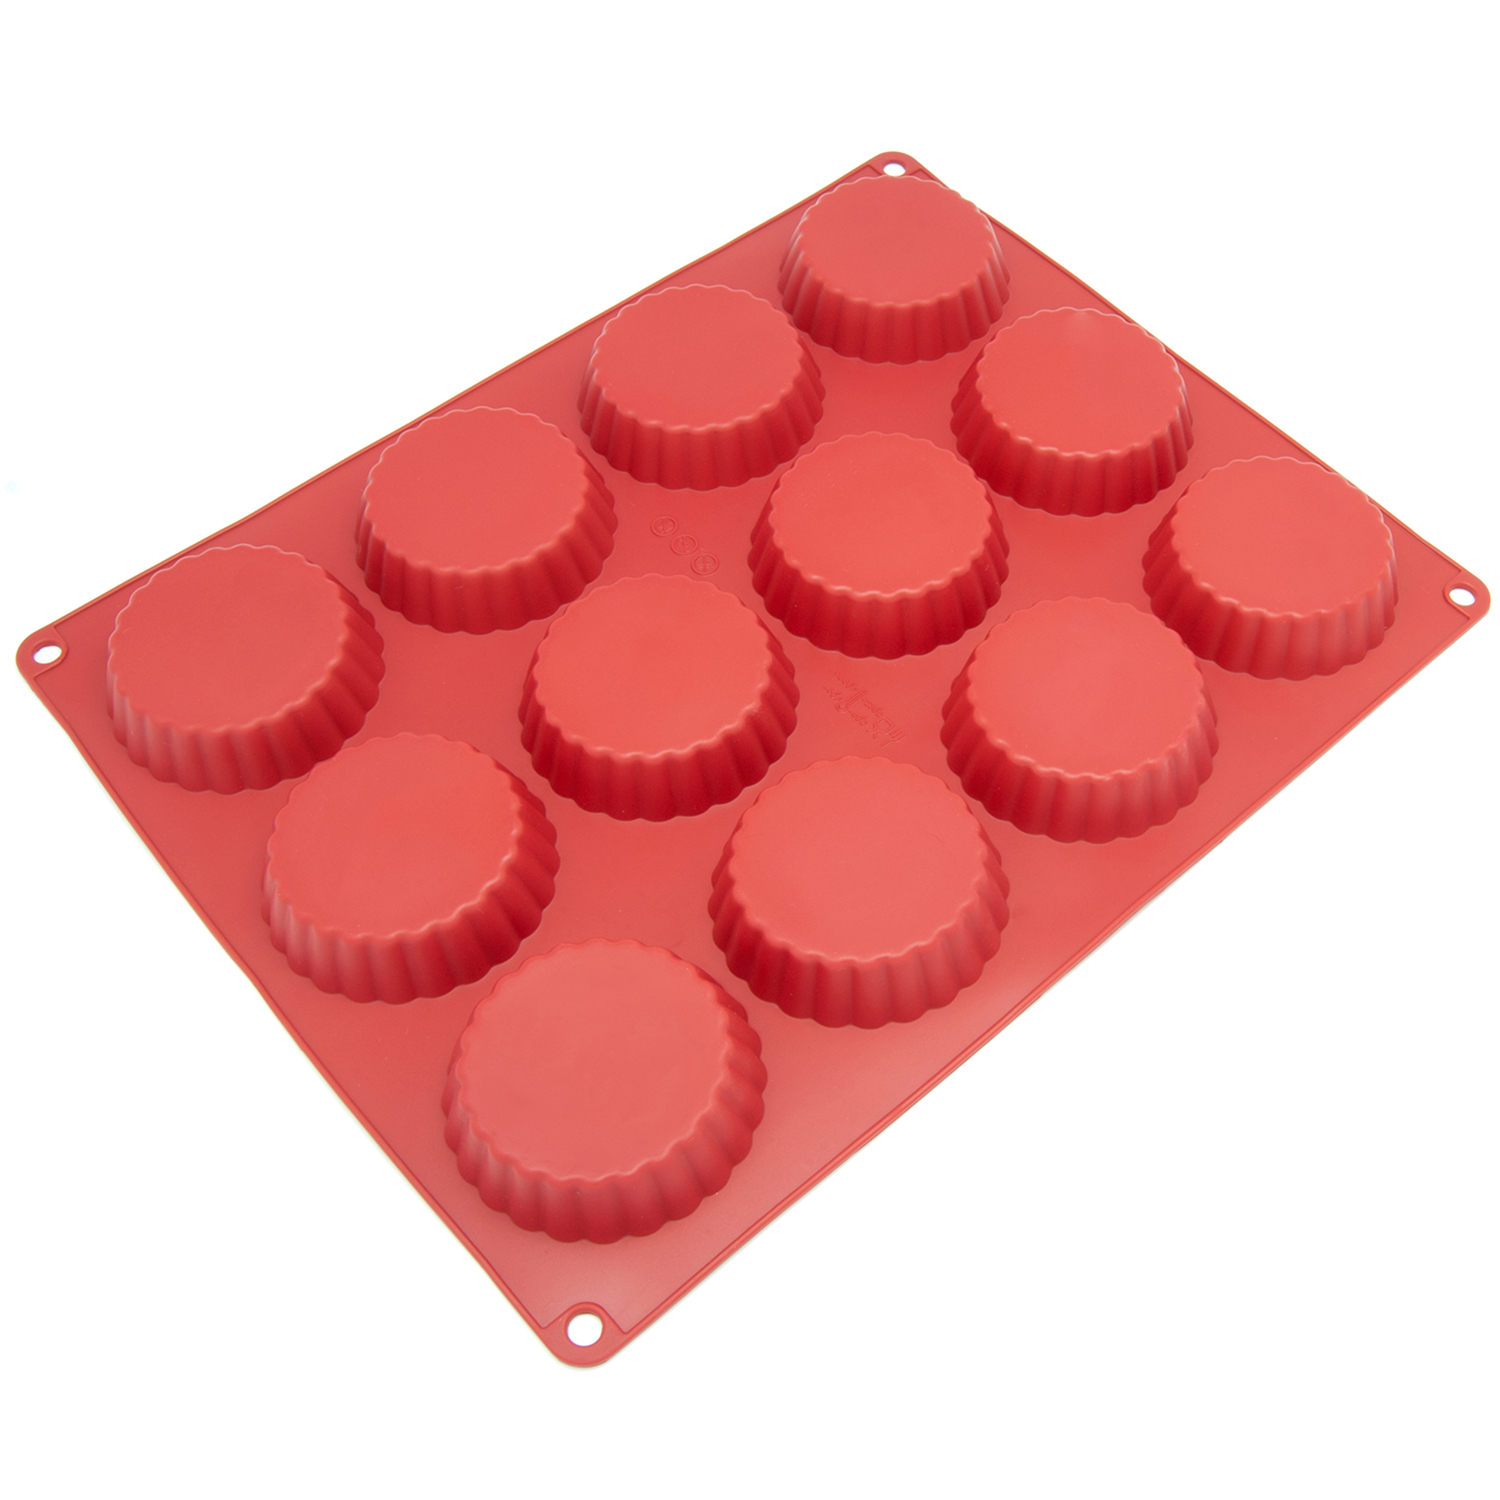 Freshware Silicone Mold for Pie, Tart, Custard, Cookie and Quiche, 12-Cavity